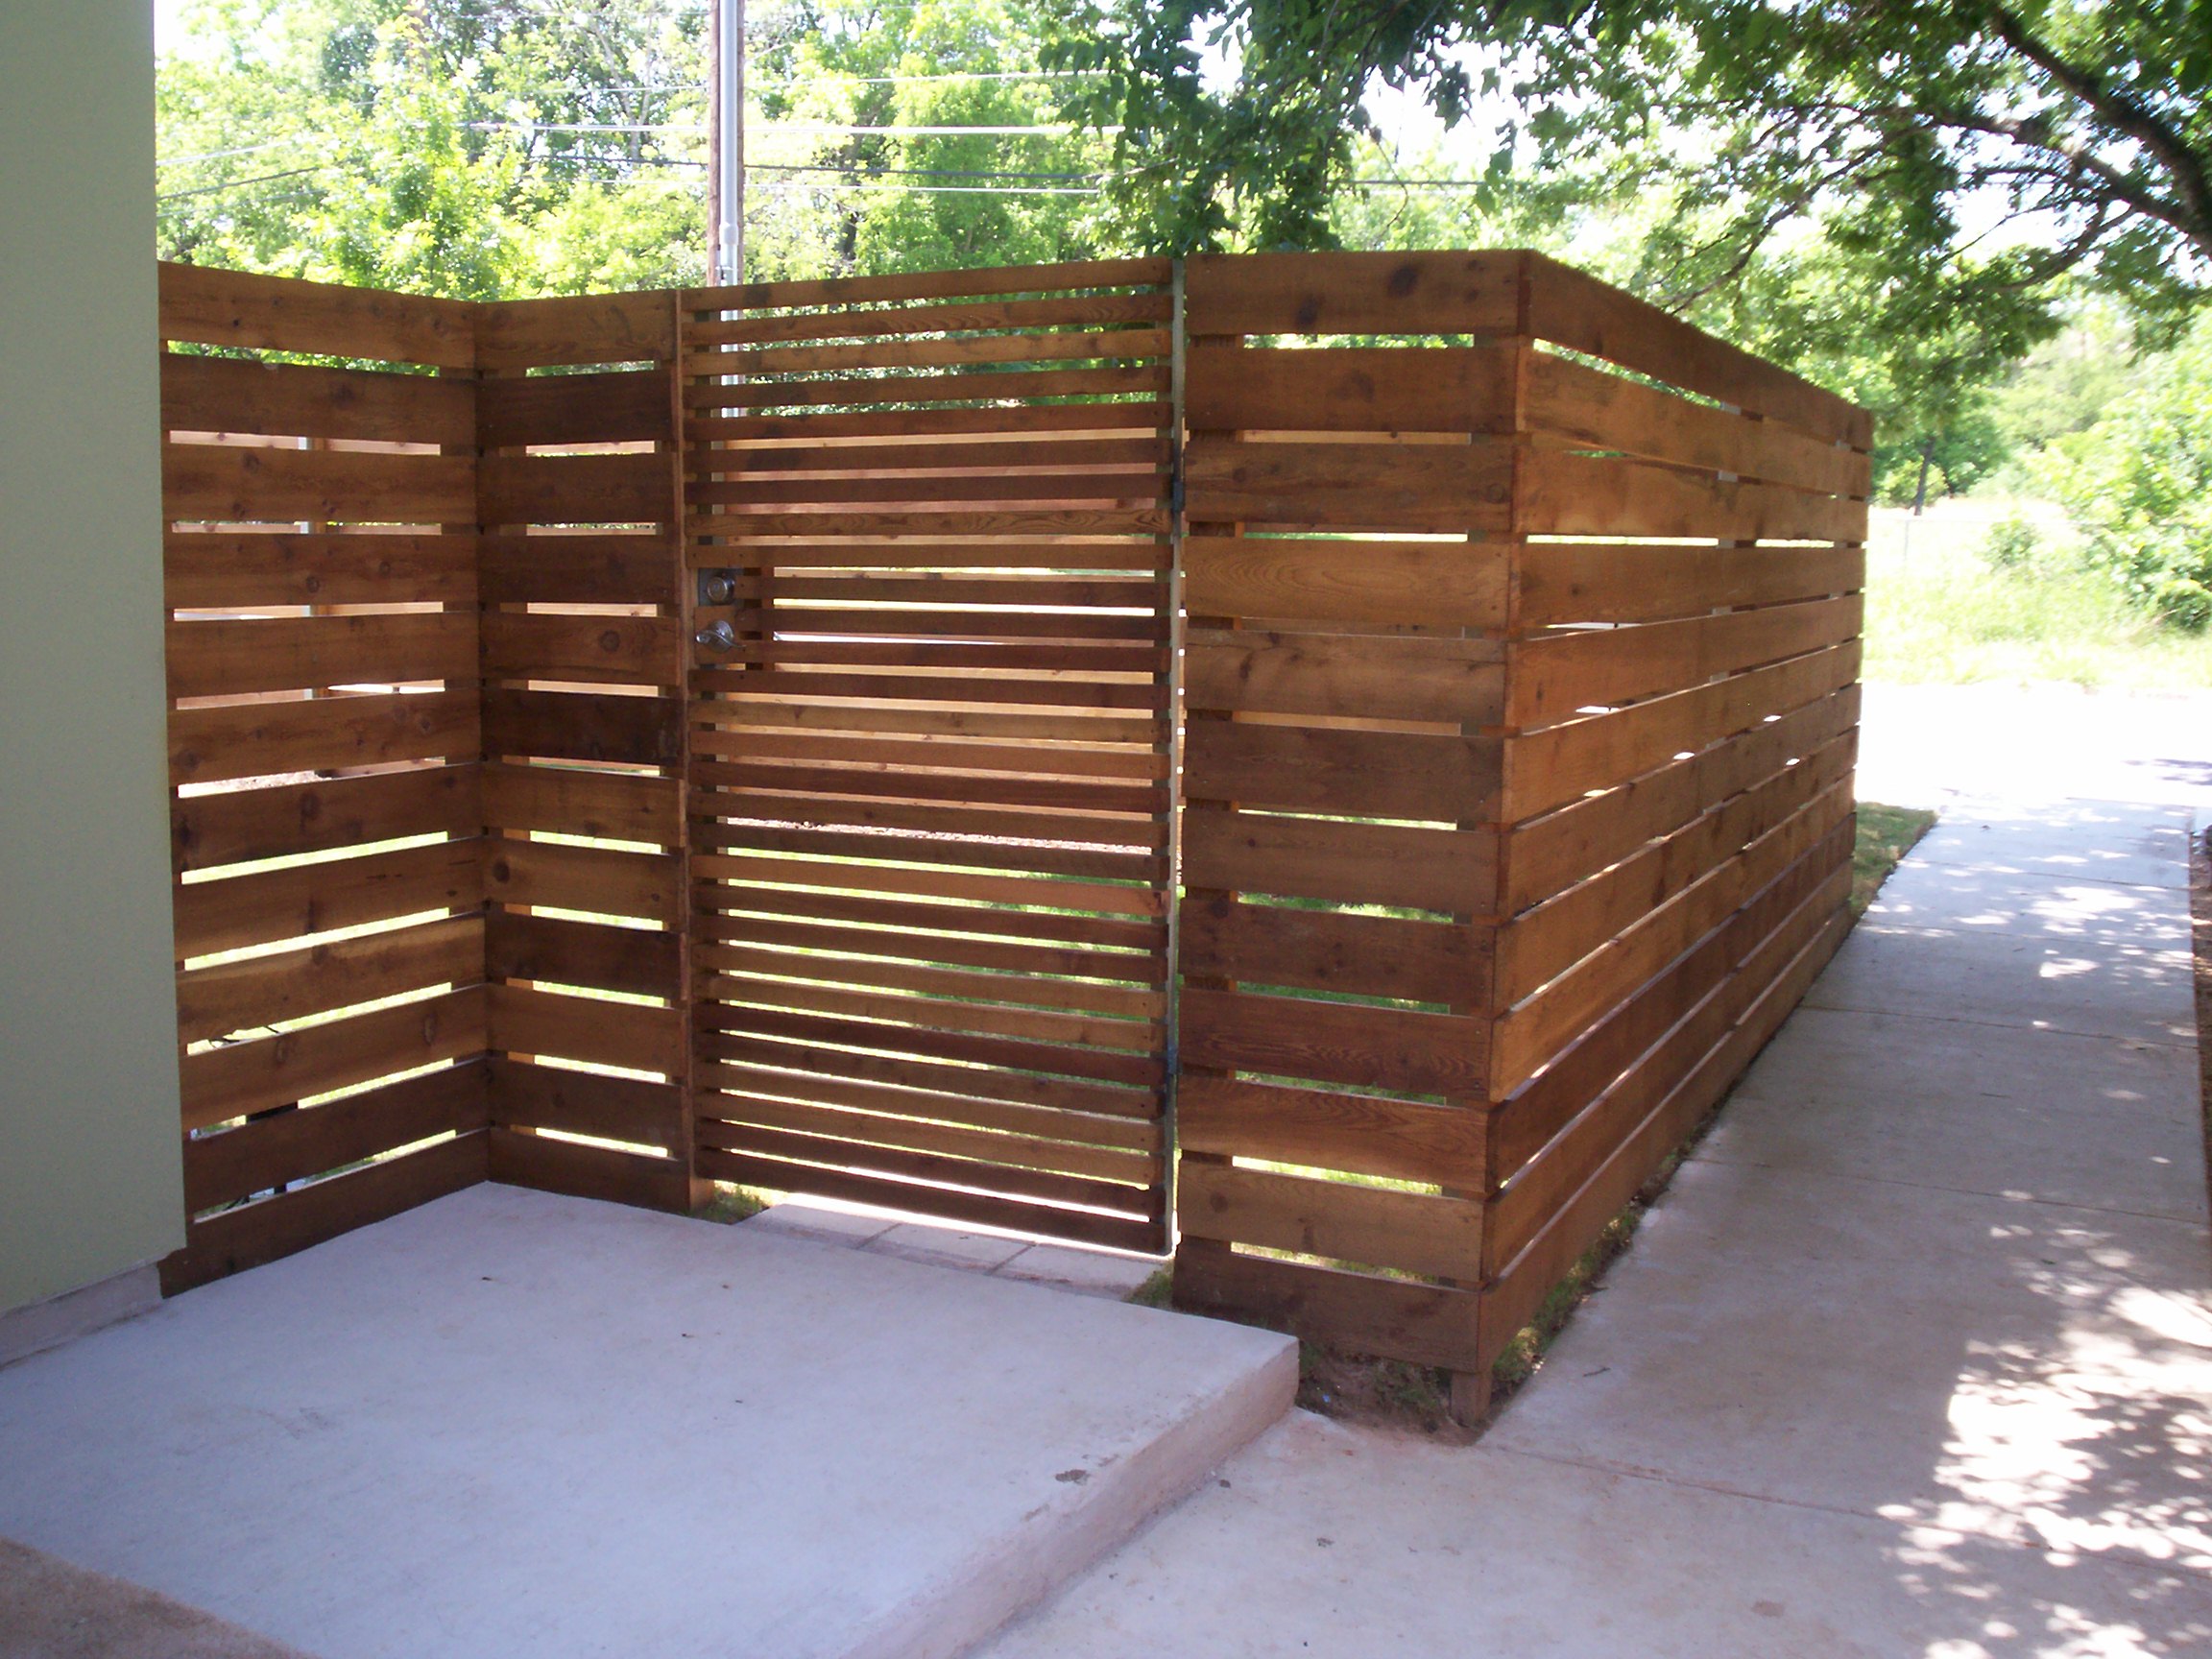 Build a wood fence Plans DIY How to Make | unusual64ijy